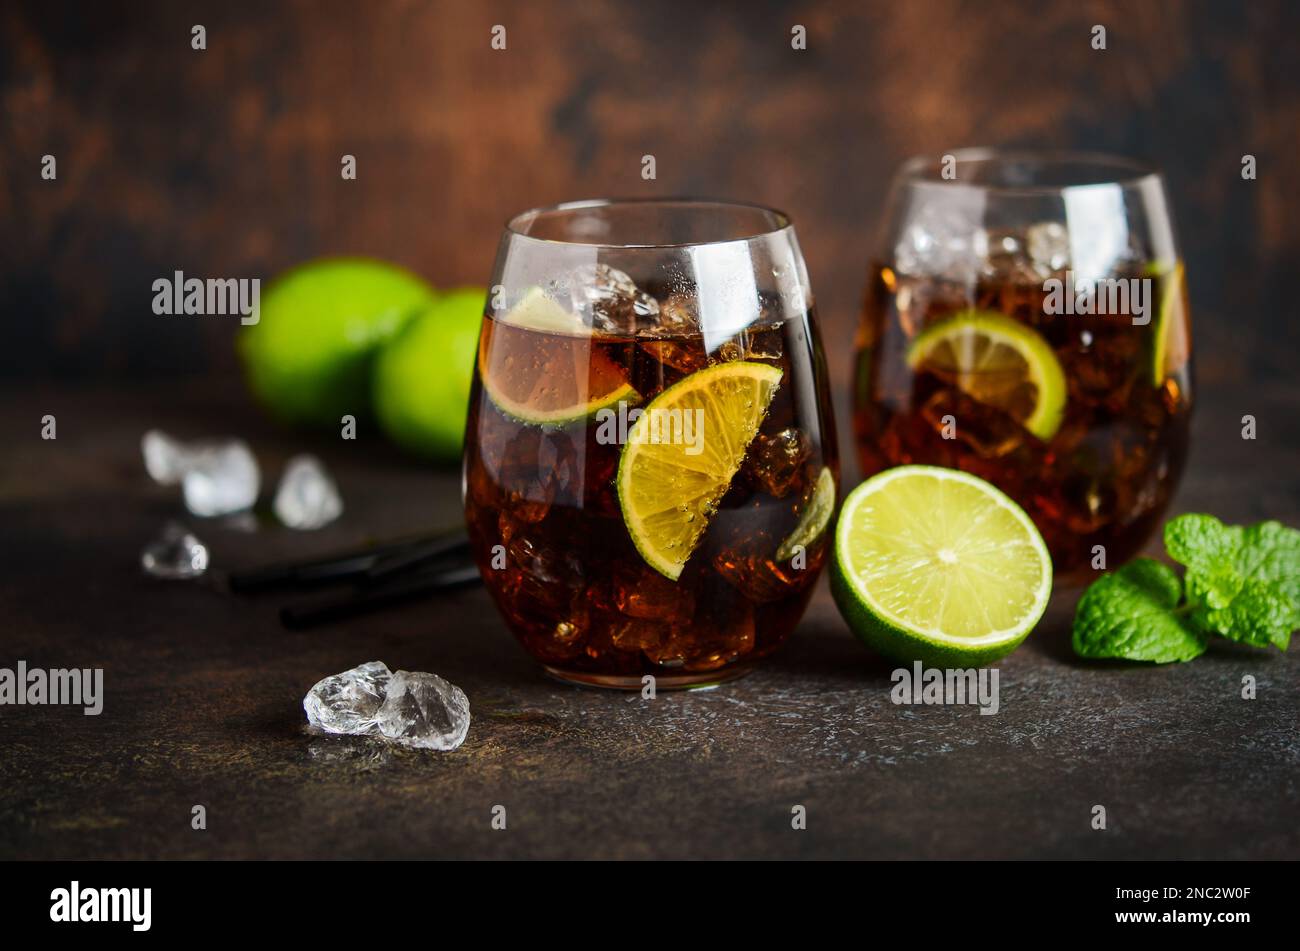 Cuba Libre with brown rum, cola and lime. Cuba Libre or long island cocktail. Stock Photo